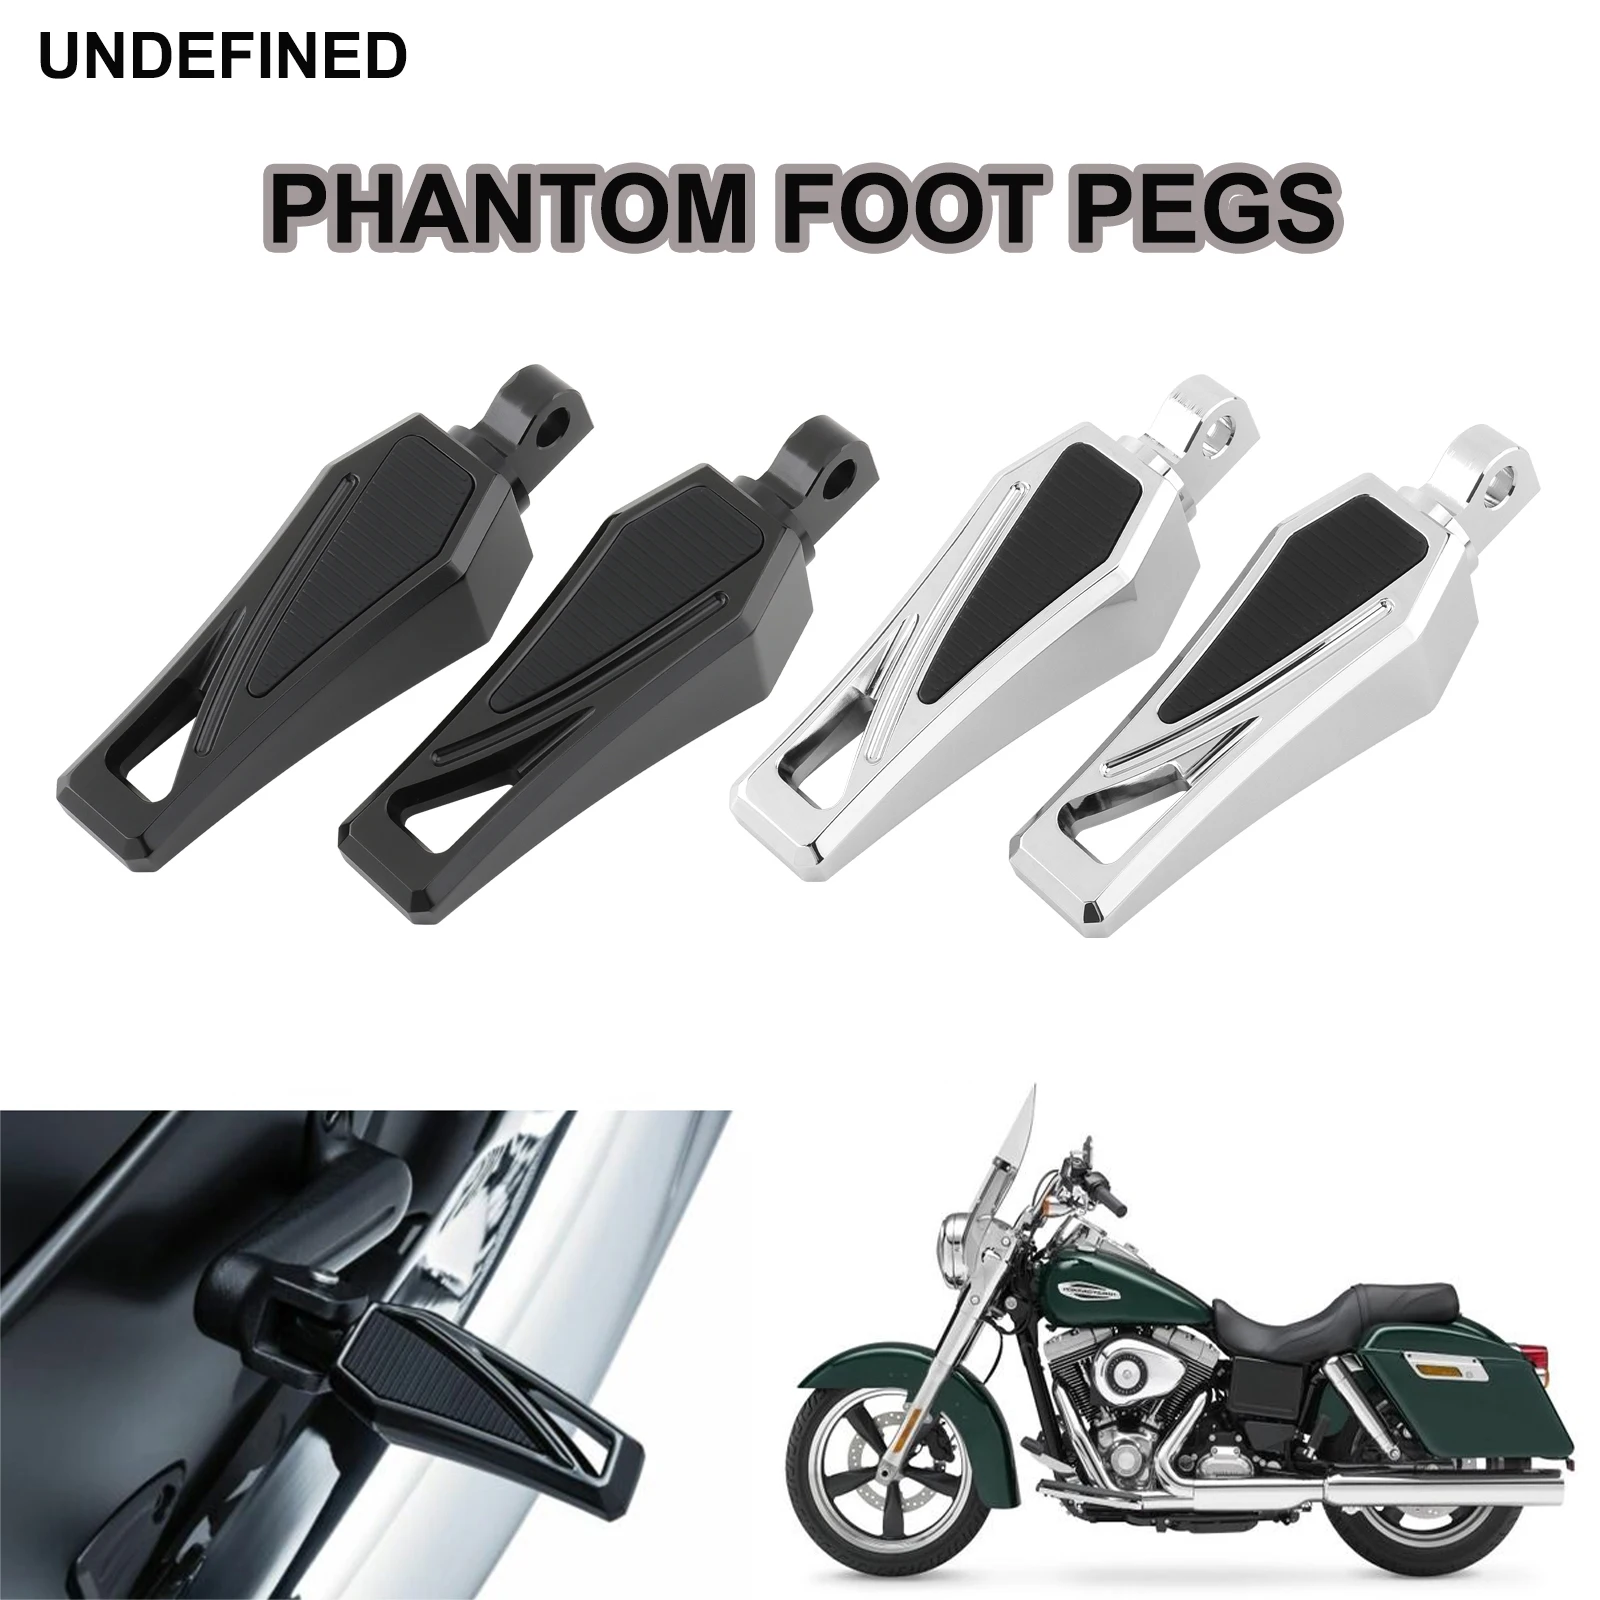 

Motorcycle Foot Pegs Phantom Footrests Pedal For Harley Touring Electra Glide Sportster 883 Dyna Street Bob Softail Fat Boy